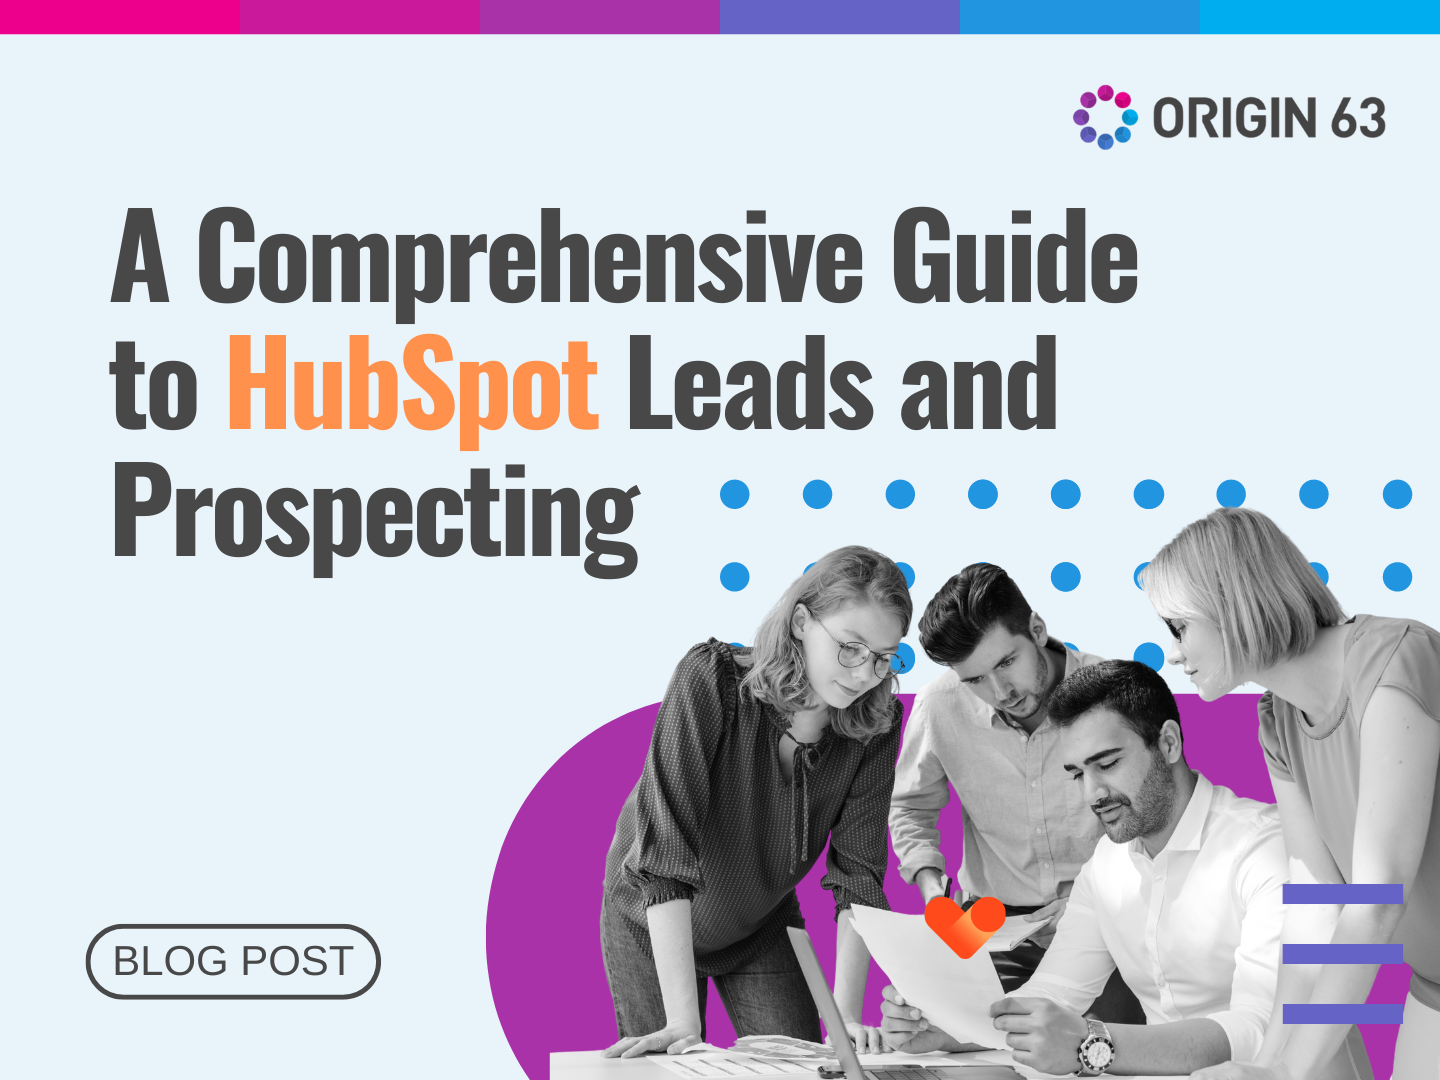 HubSpot's Prospecting Workspace can help you identify & convert high-value leads. 